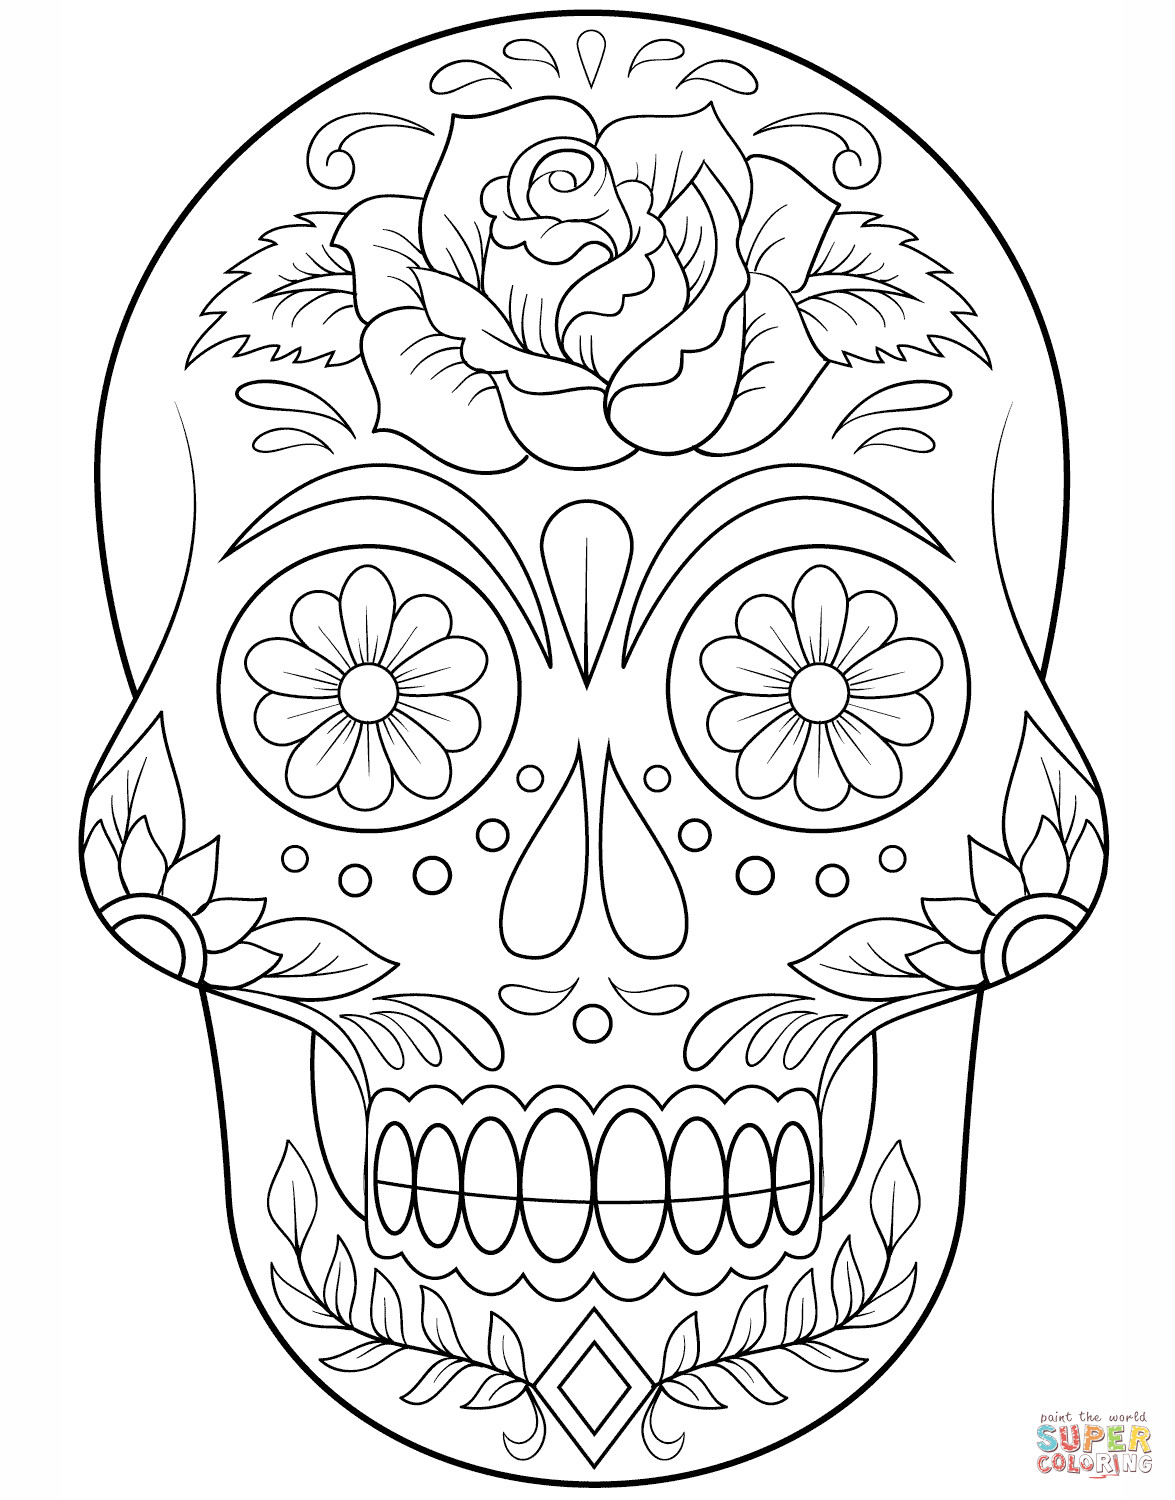 Sugar Skull Coloring Pages
 Sugar Skull with Flowers coloring page